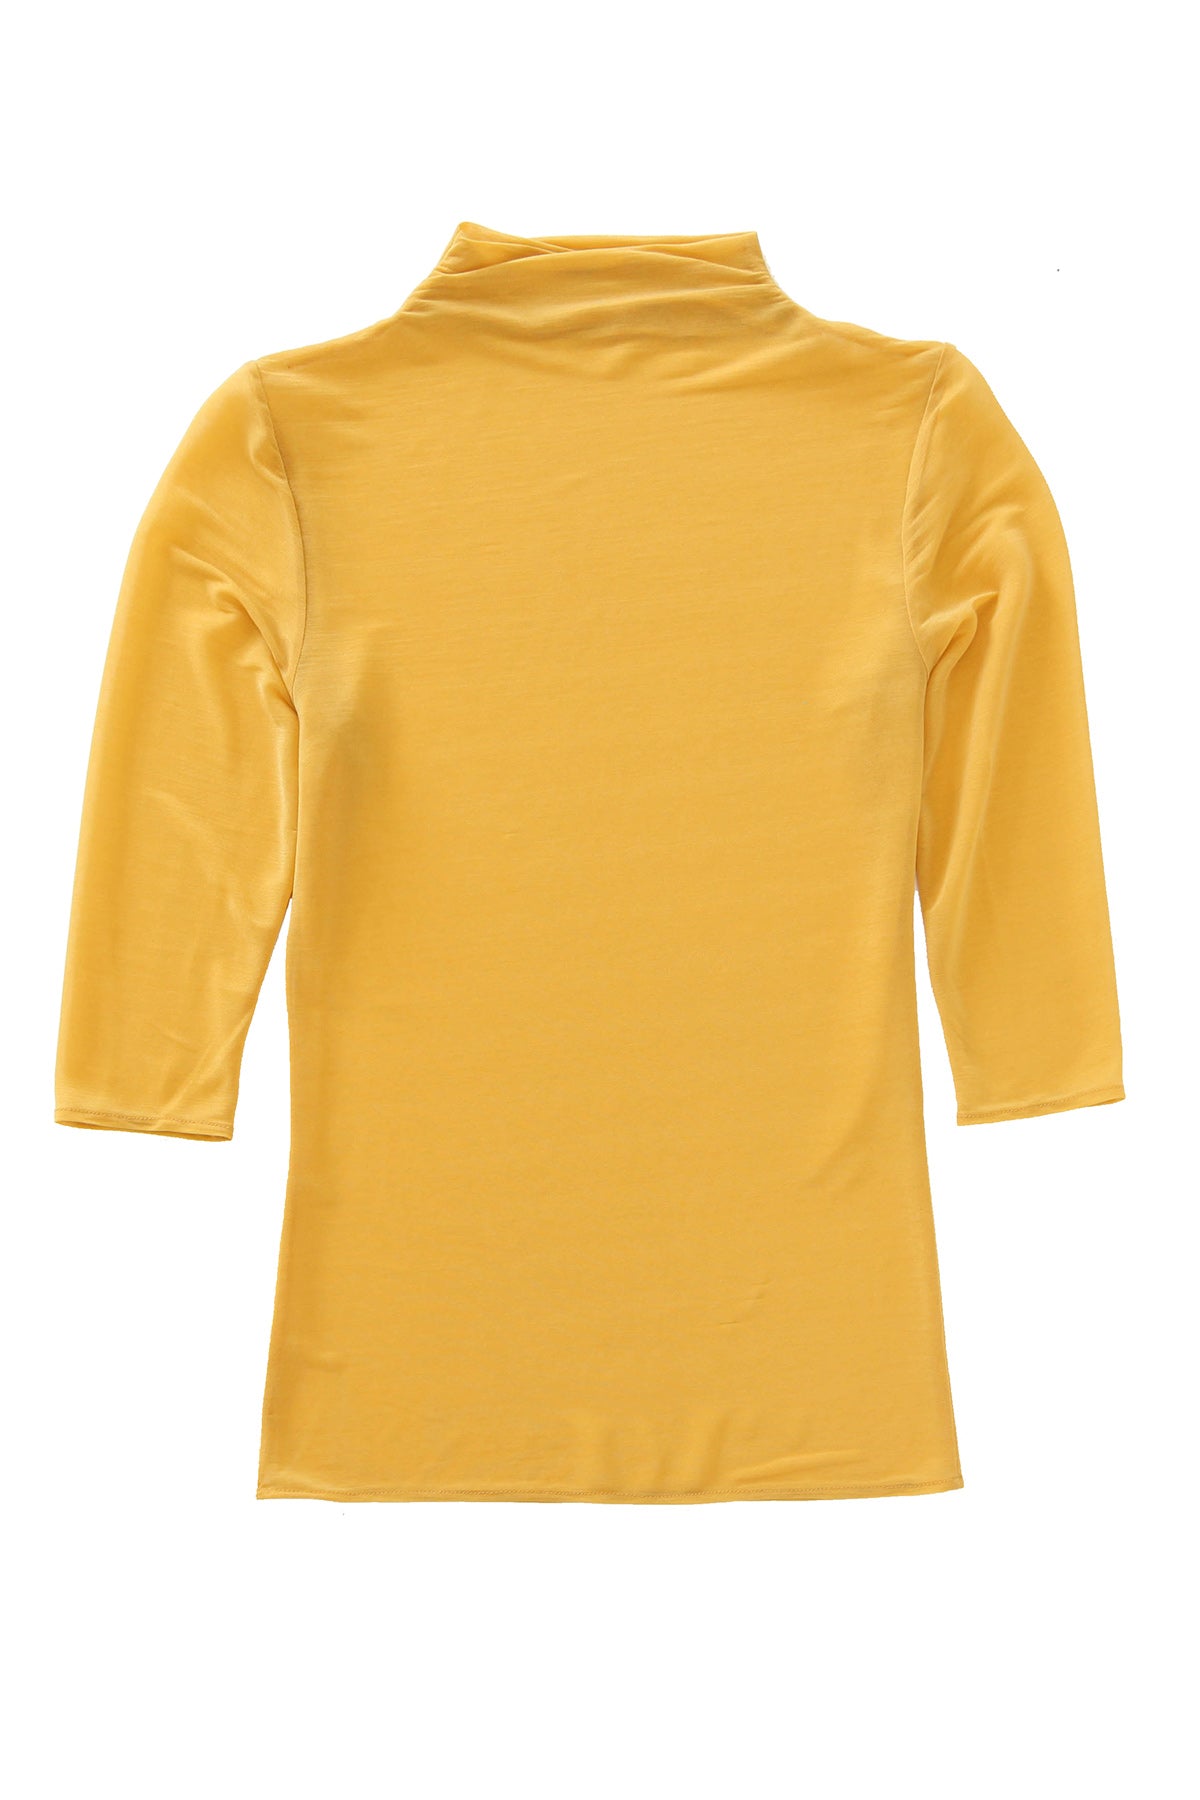 Transparent Knit in Mustard